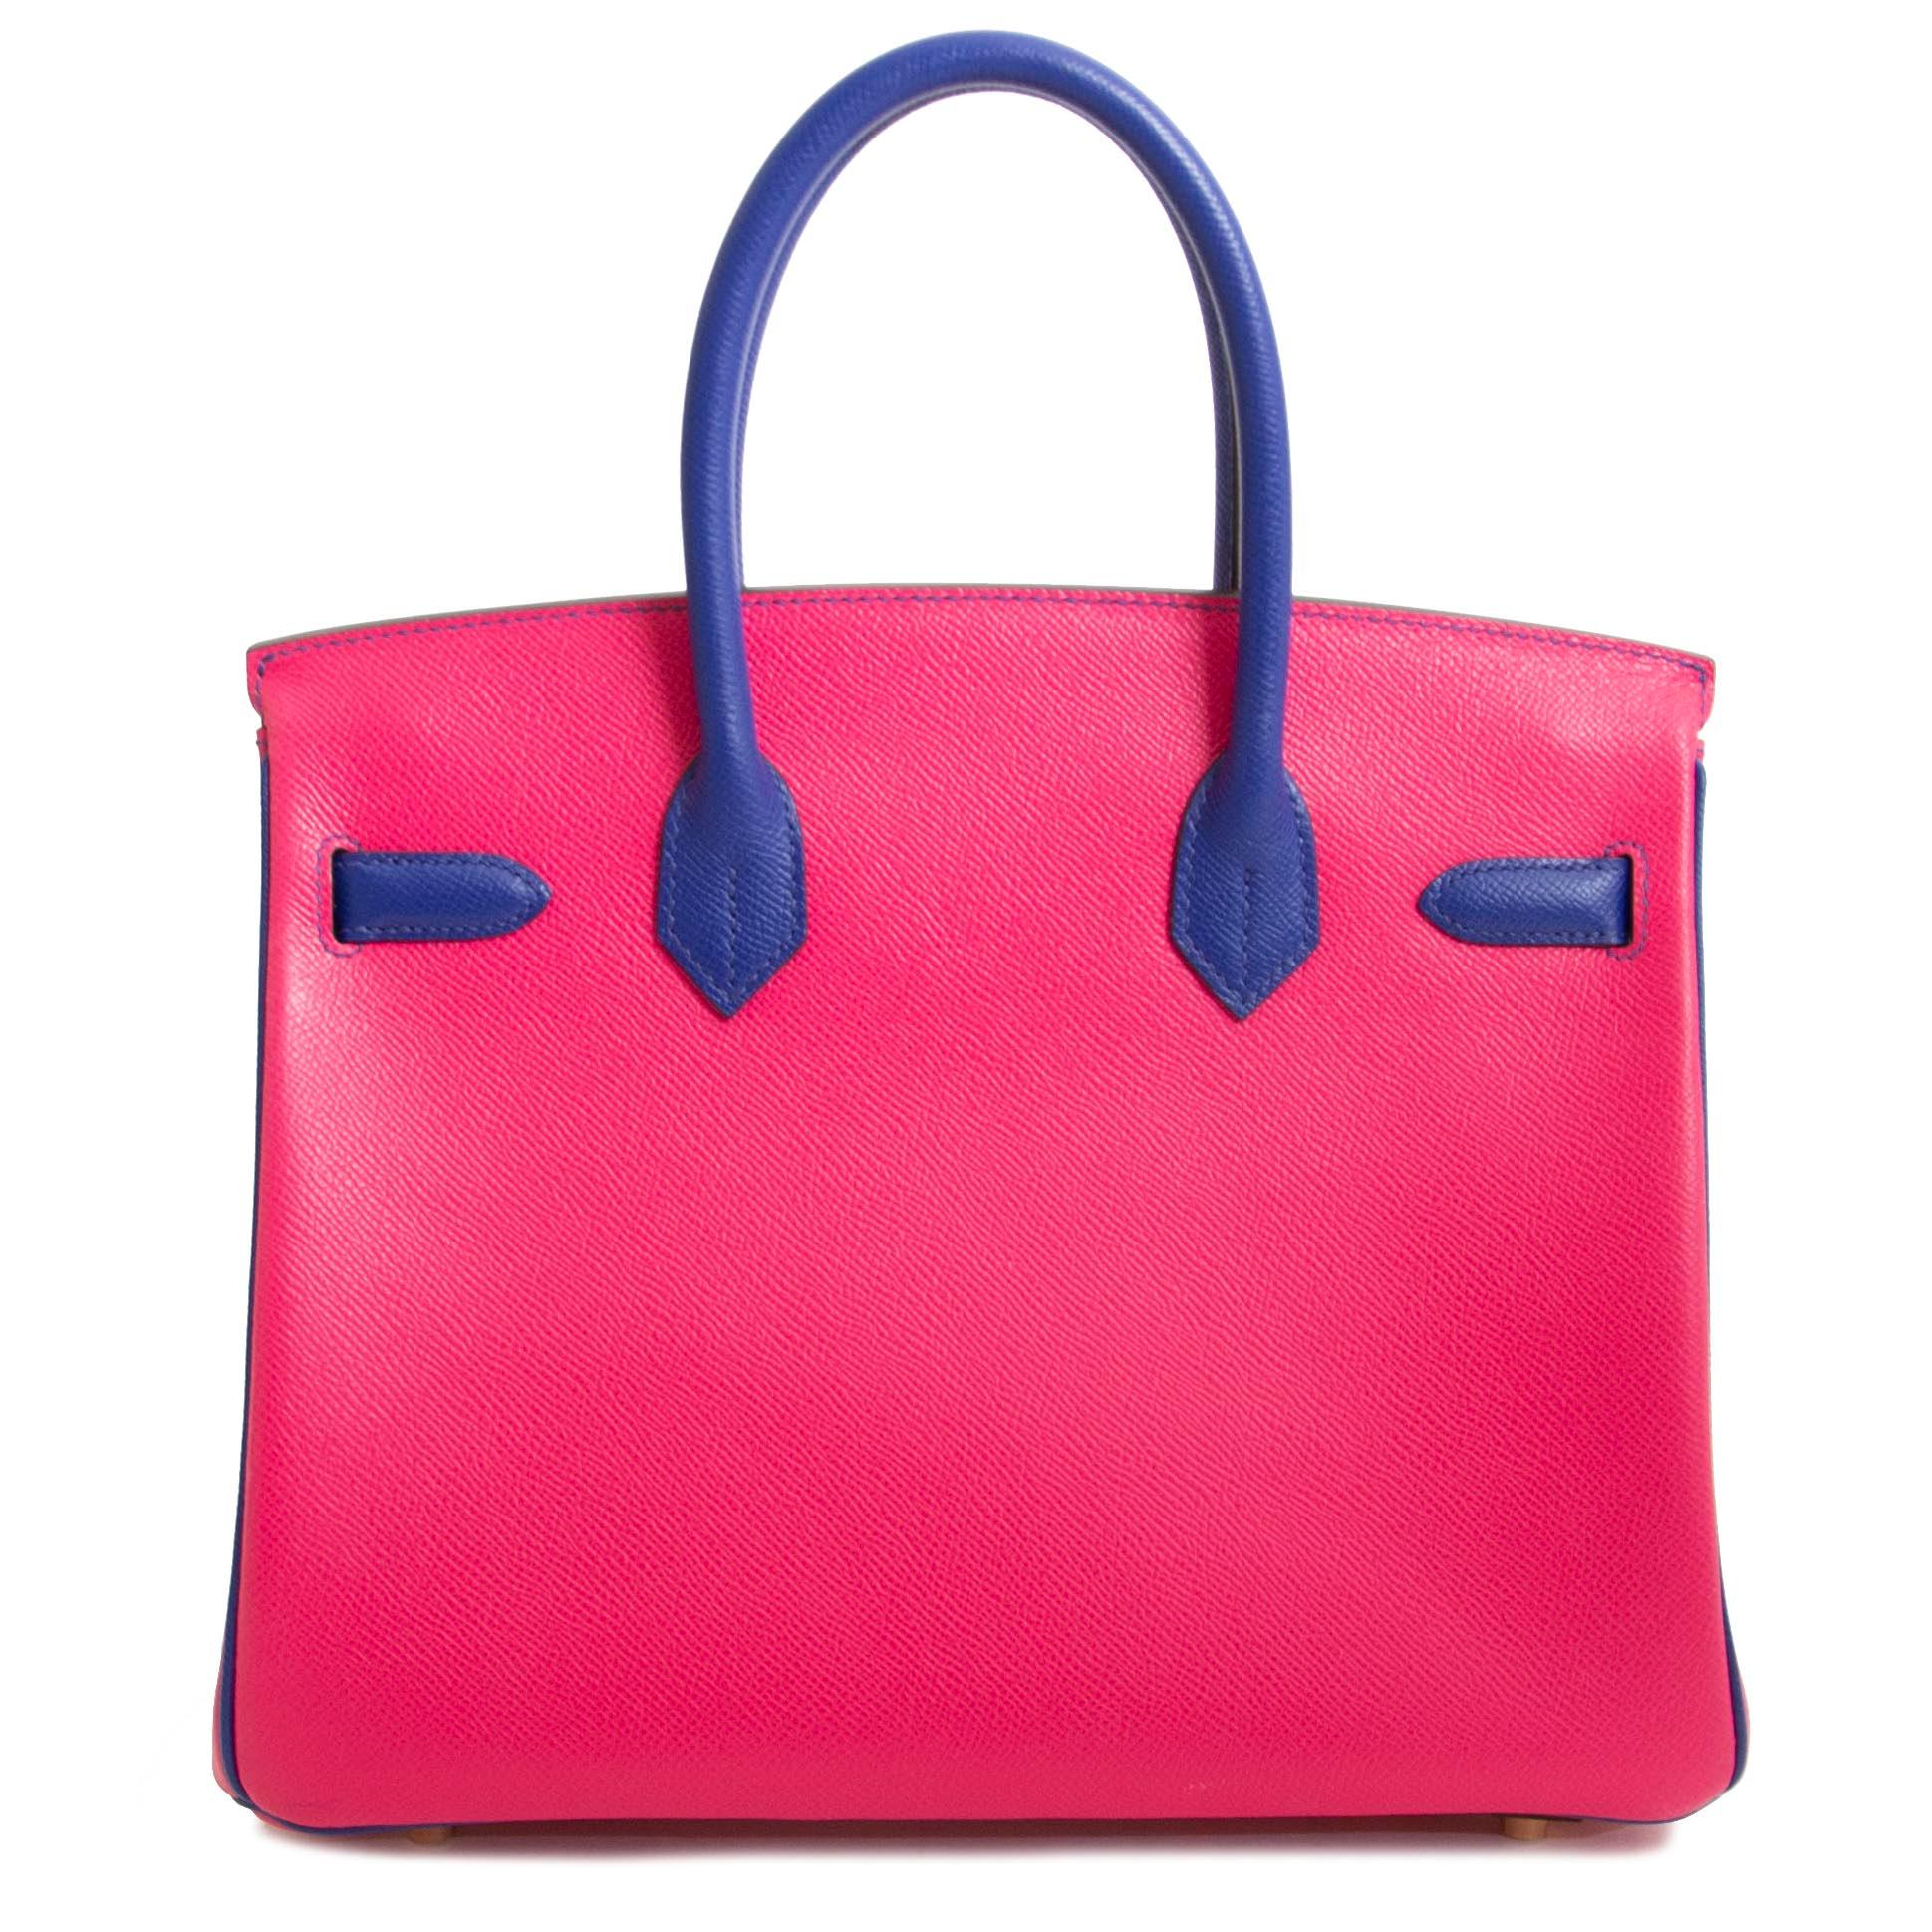 Hermès Birkin 30 Epsom HSS Horseshoe GHW Rose Tyrien / Bleu Electrique GHW
Showstopper alert! This beautiful Hermès Birkin bag in the size 30 is crafted out of two colors of sturdy and structured Epsom leather. The bag features gold toned hardware,